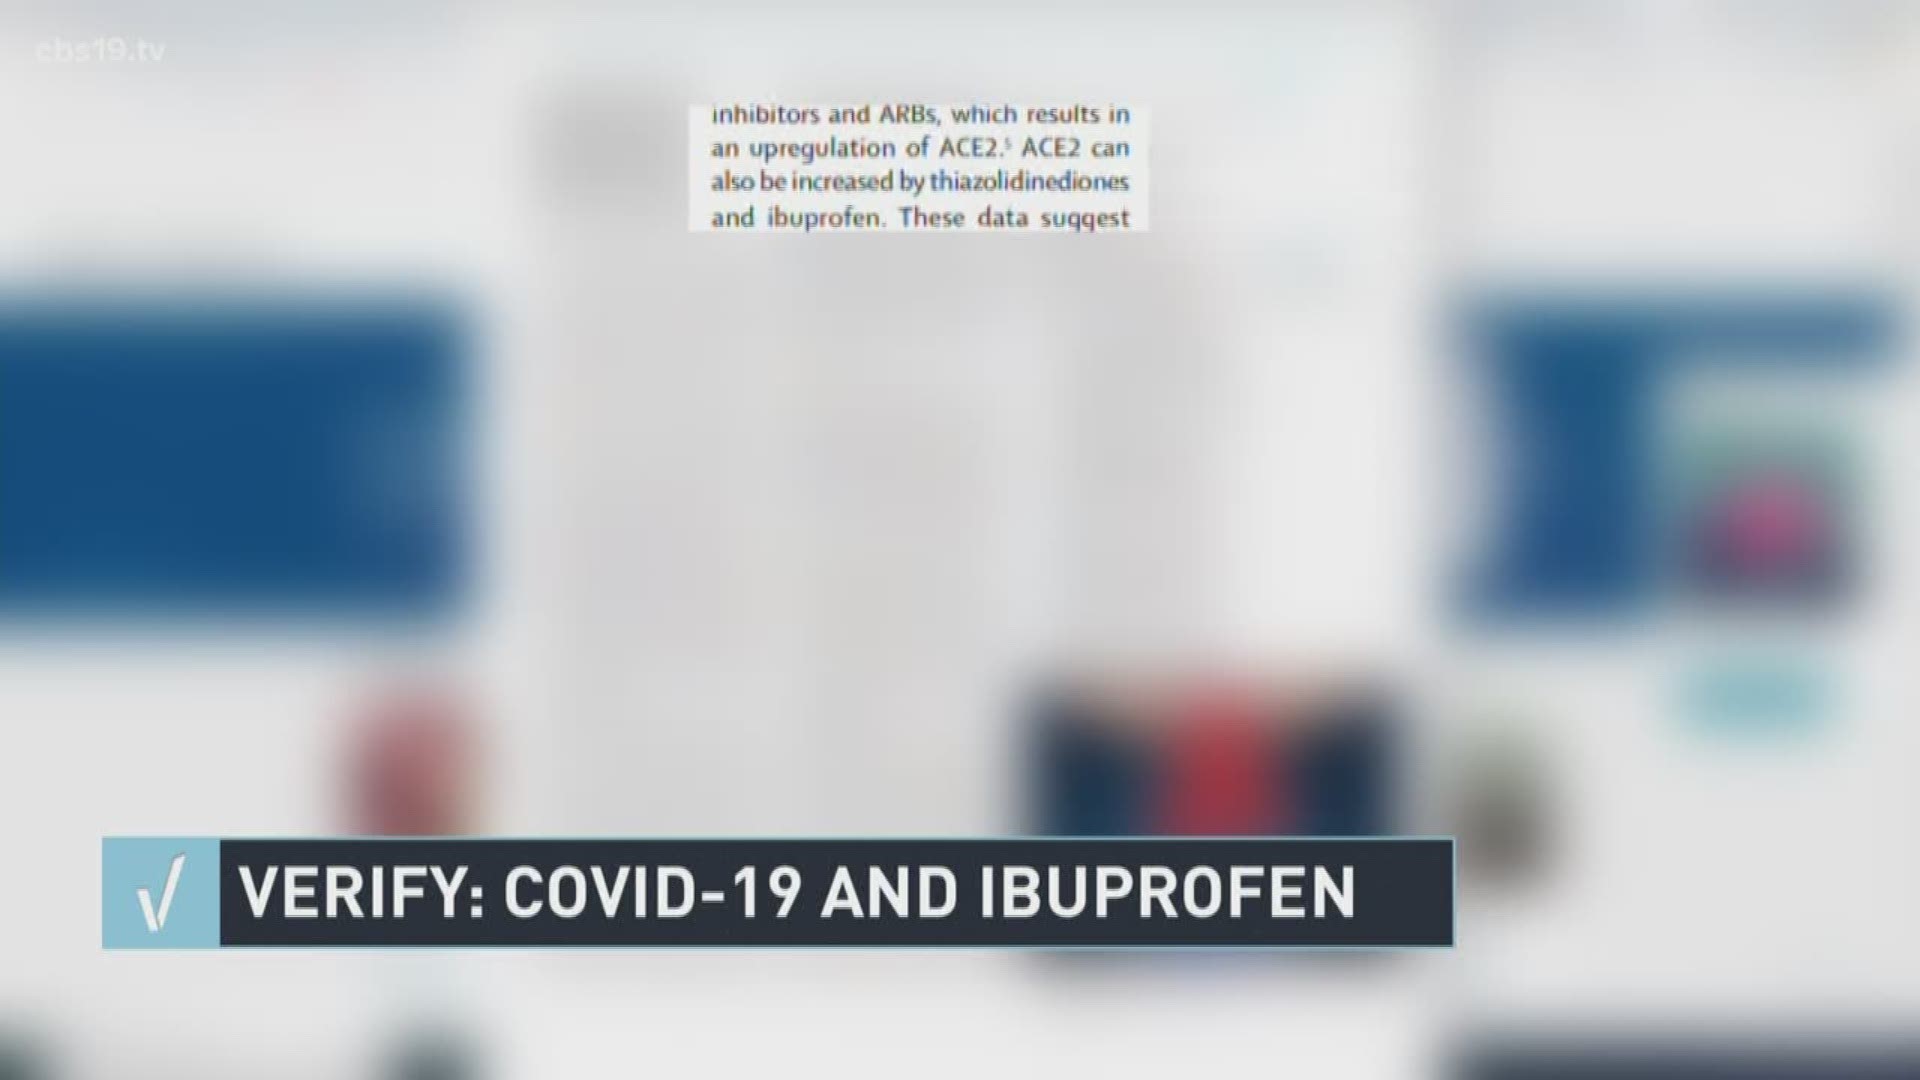 Some viewers have asked if ibuprofen could intensify symptoms of coronavirus. CBS19's David Lippman verifies whether the claims are true.